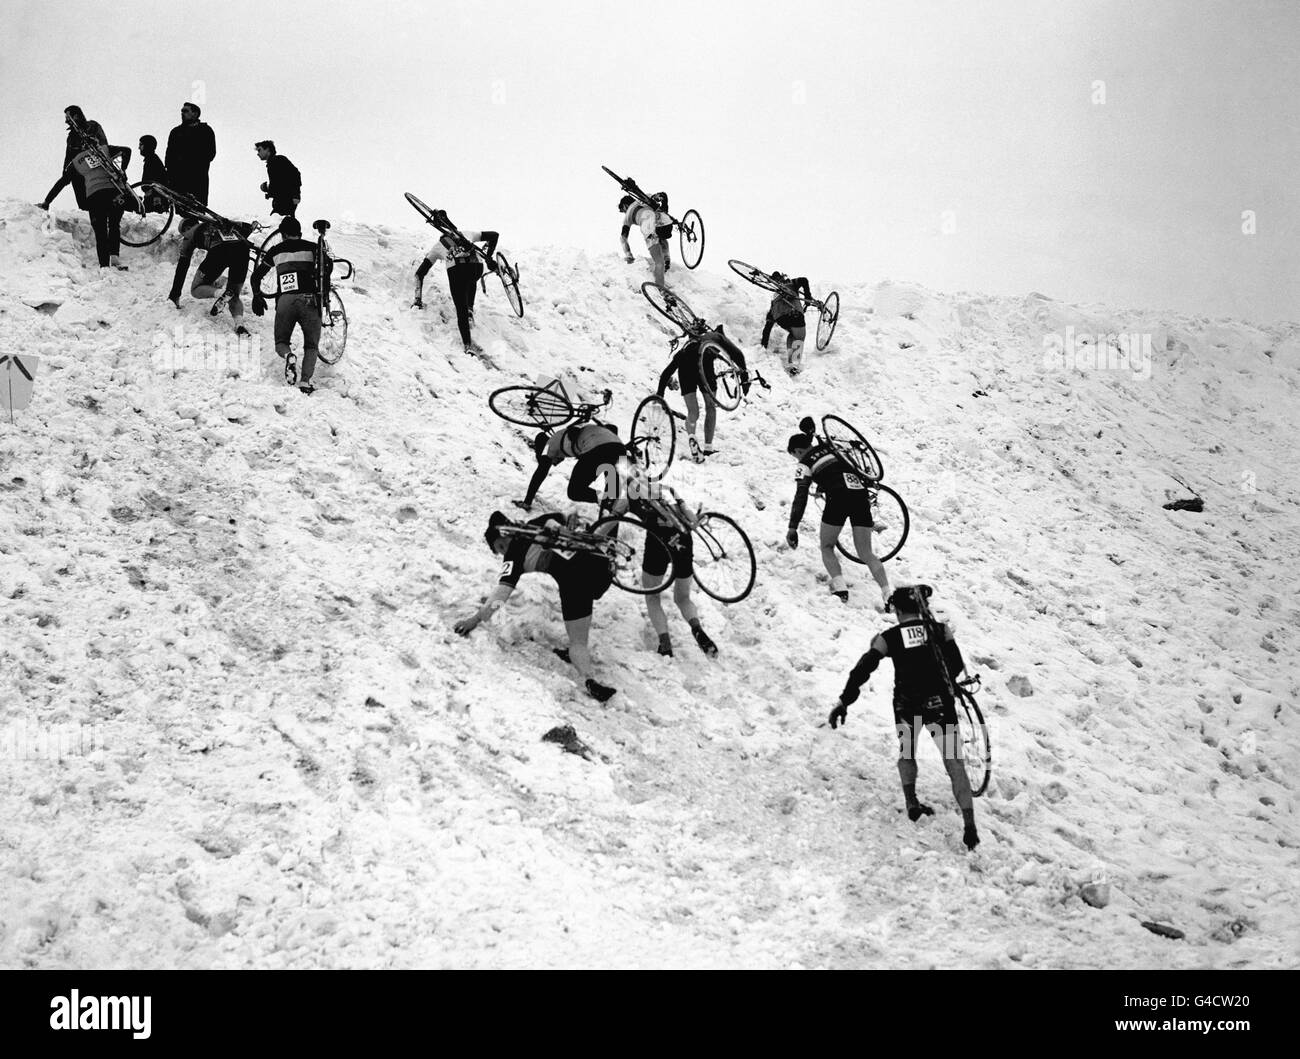 Cycling - 1963 British National Cycle Cross Championships - Harlow Town Park. Competitors struggle to get to the top of a snow covered incline during the race. Stock Photo